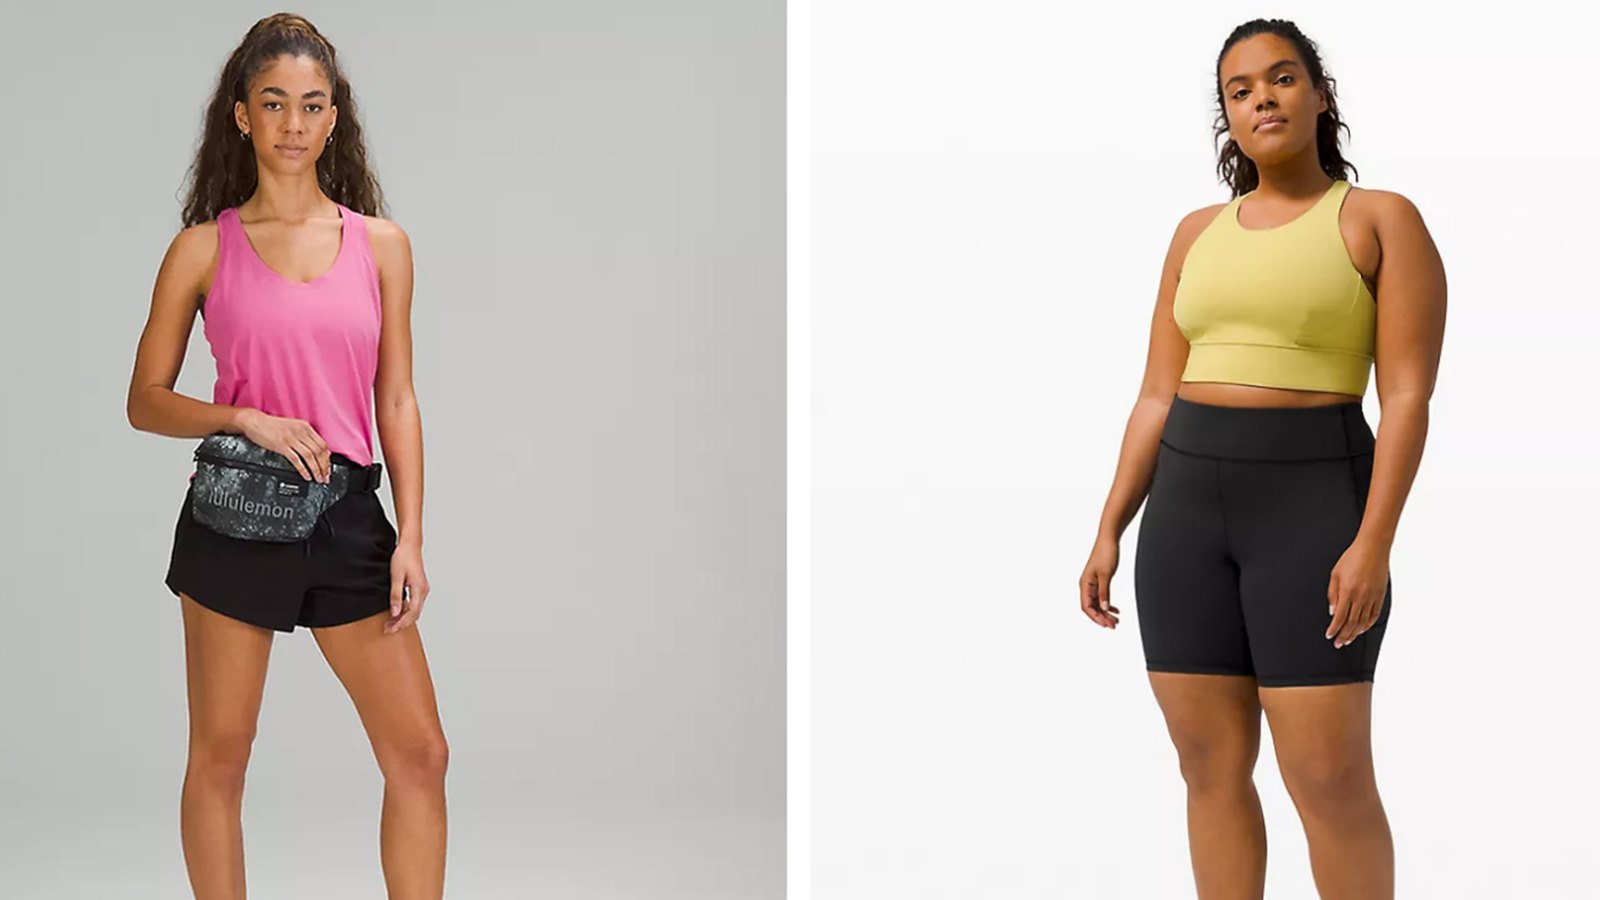 lululemon Specials You'll Love for Spring Weather